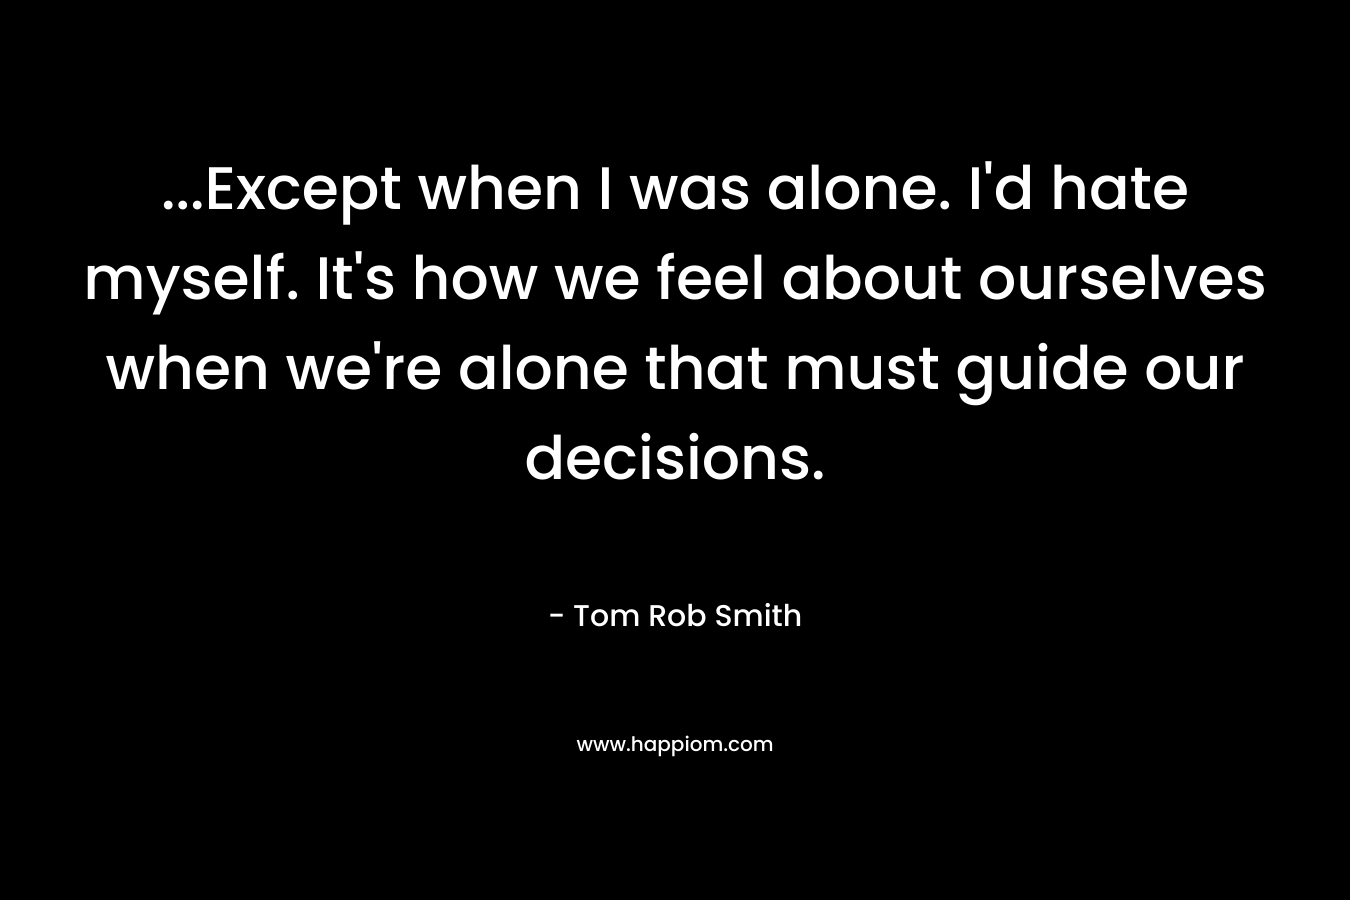 ...Except when I was alone. I'd hate myself. It's how we feel about ourselves when we're alone that must guide our decisions.